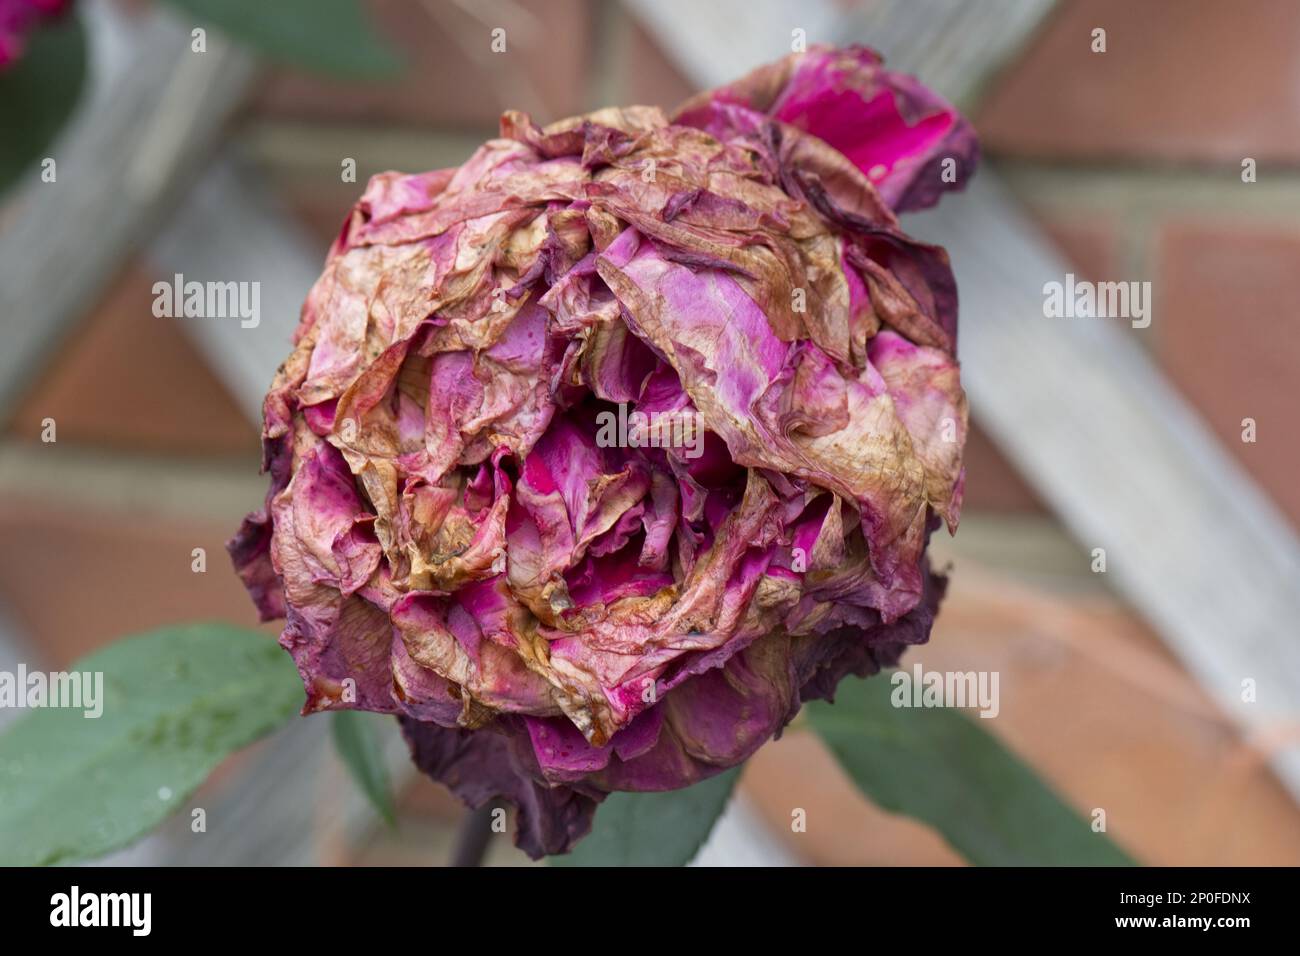 Grey mould (Botrytis cinerea) or Botrytis blight, spoiling the bloom of a red rose after summer rain Stock Photo